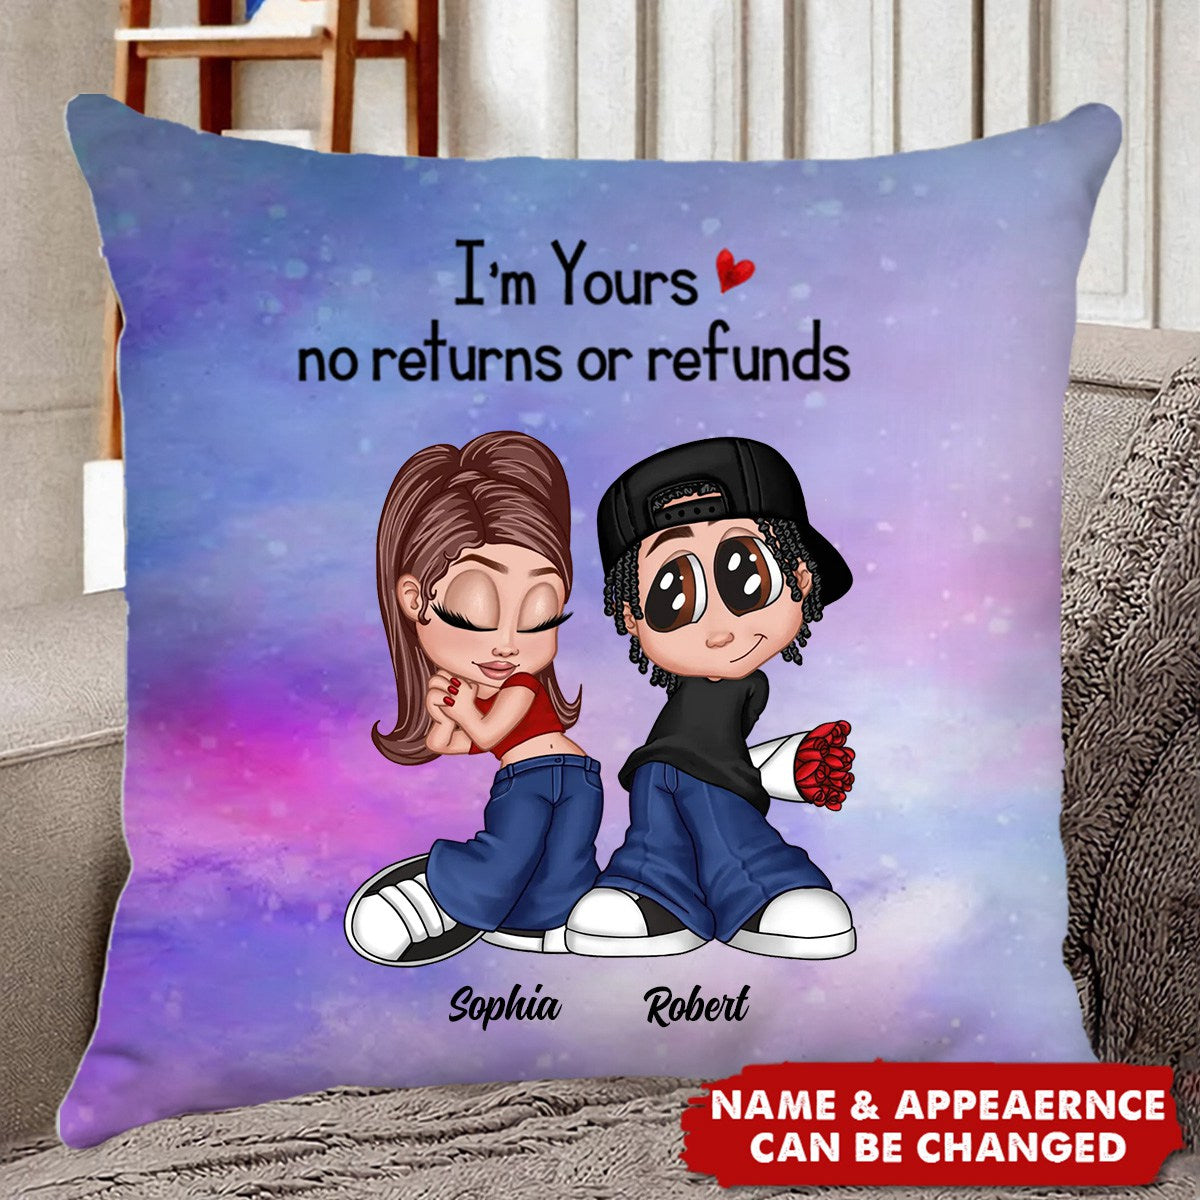 Y2K Couple - Together Since - Personalized Pillow, Gift For Him, For Her